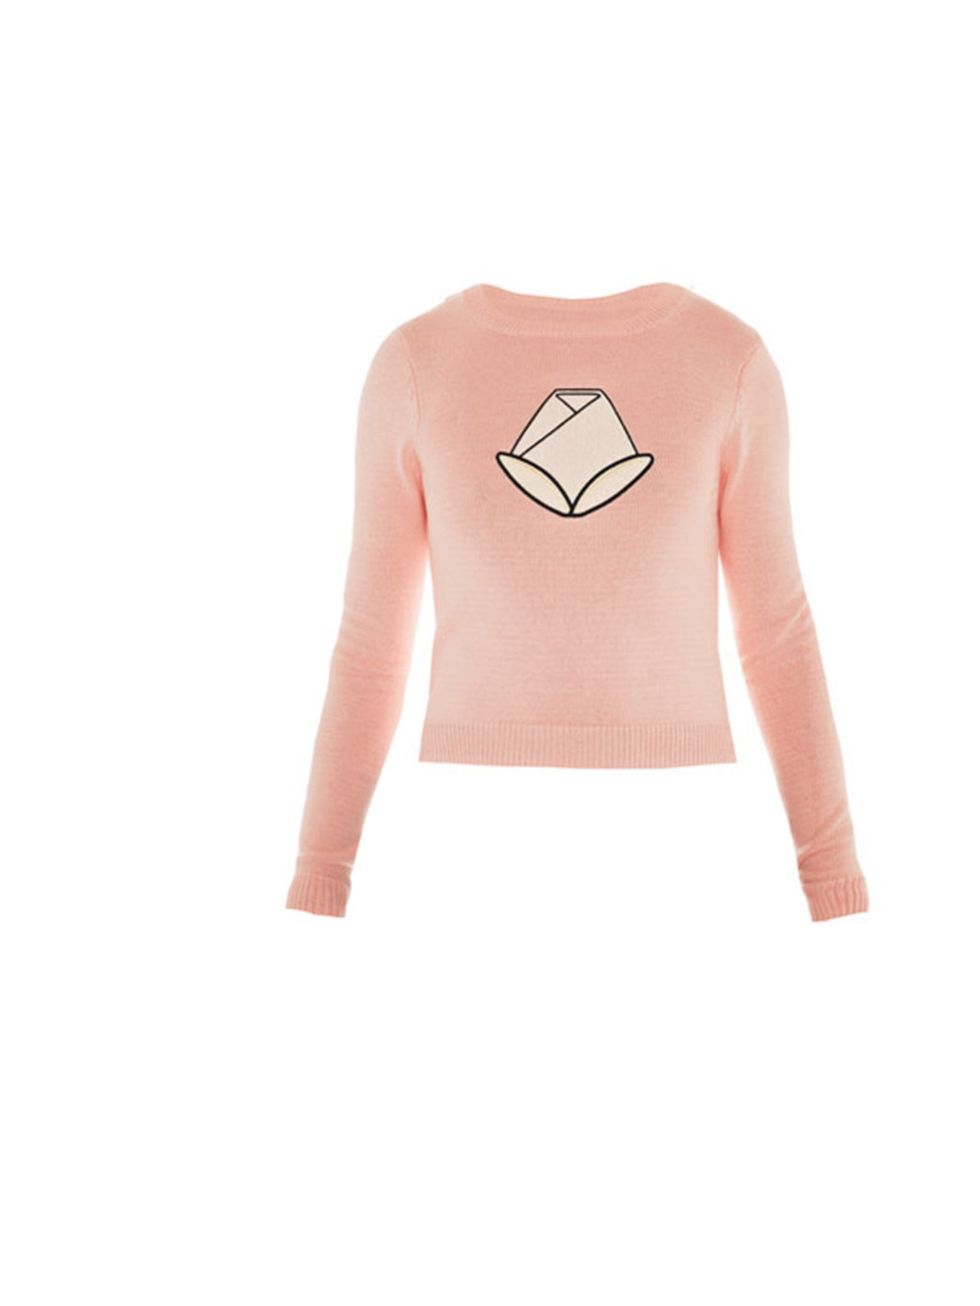 <p>Reflect the change in seasons by swapping your dark cashmeres in favour of lighter, pastel knits... Opening Ceremony tulip sweater, £165, at Matches</p><p><a href="http://shopping.elleuk.com/browse?fts=opening+ceremony+tulip+sweater">BUY NOW</a></p>